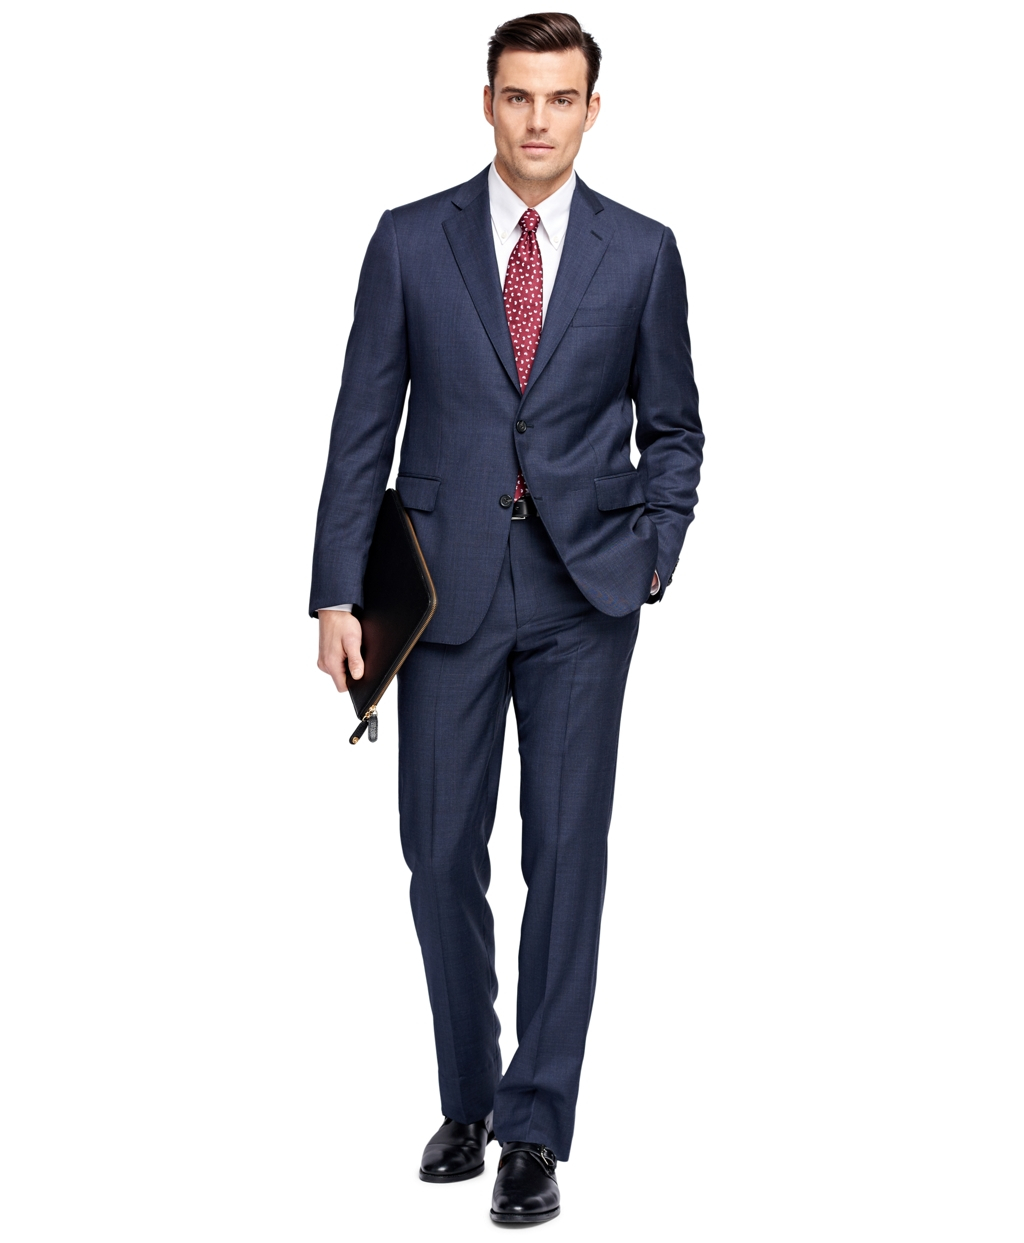 Lyst - Brooks brothers Regent Fit Windowpane 1818 Suit in Blue for Men